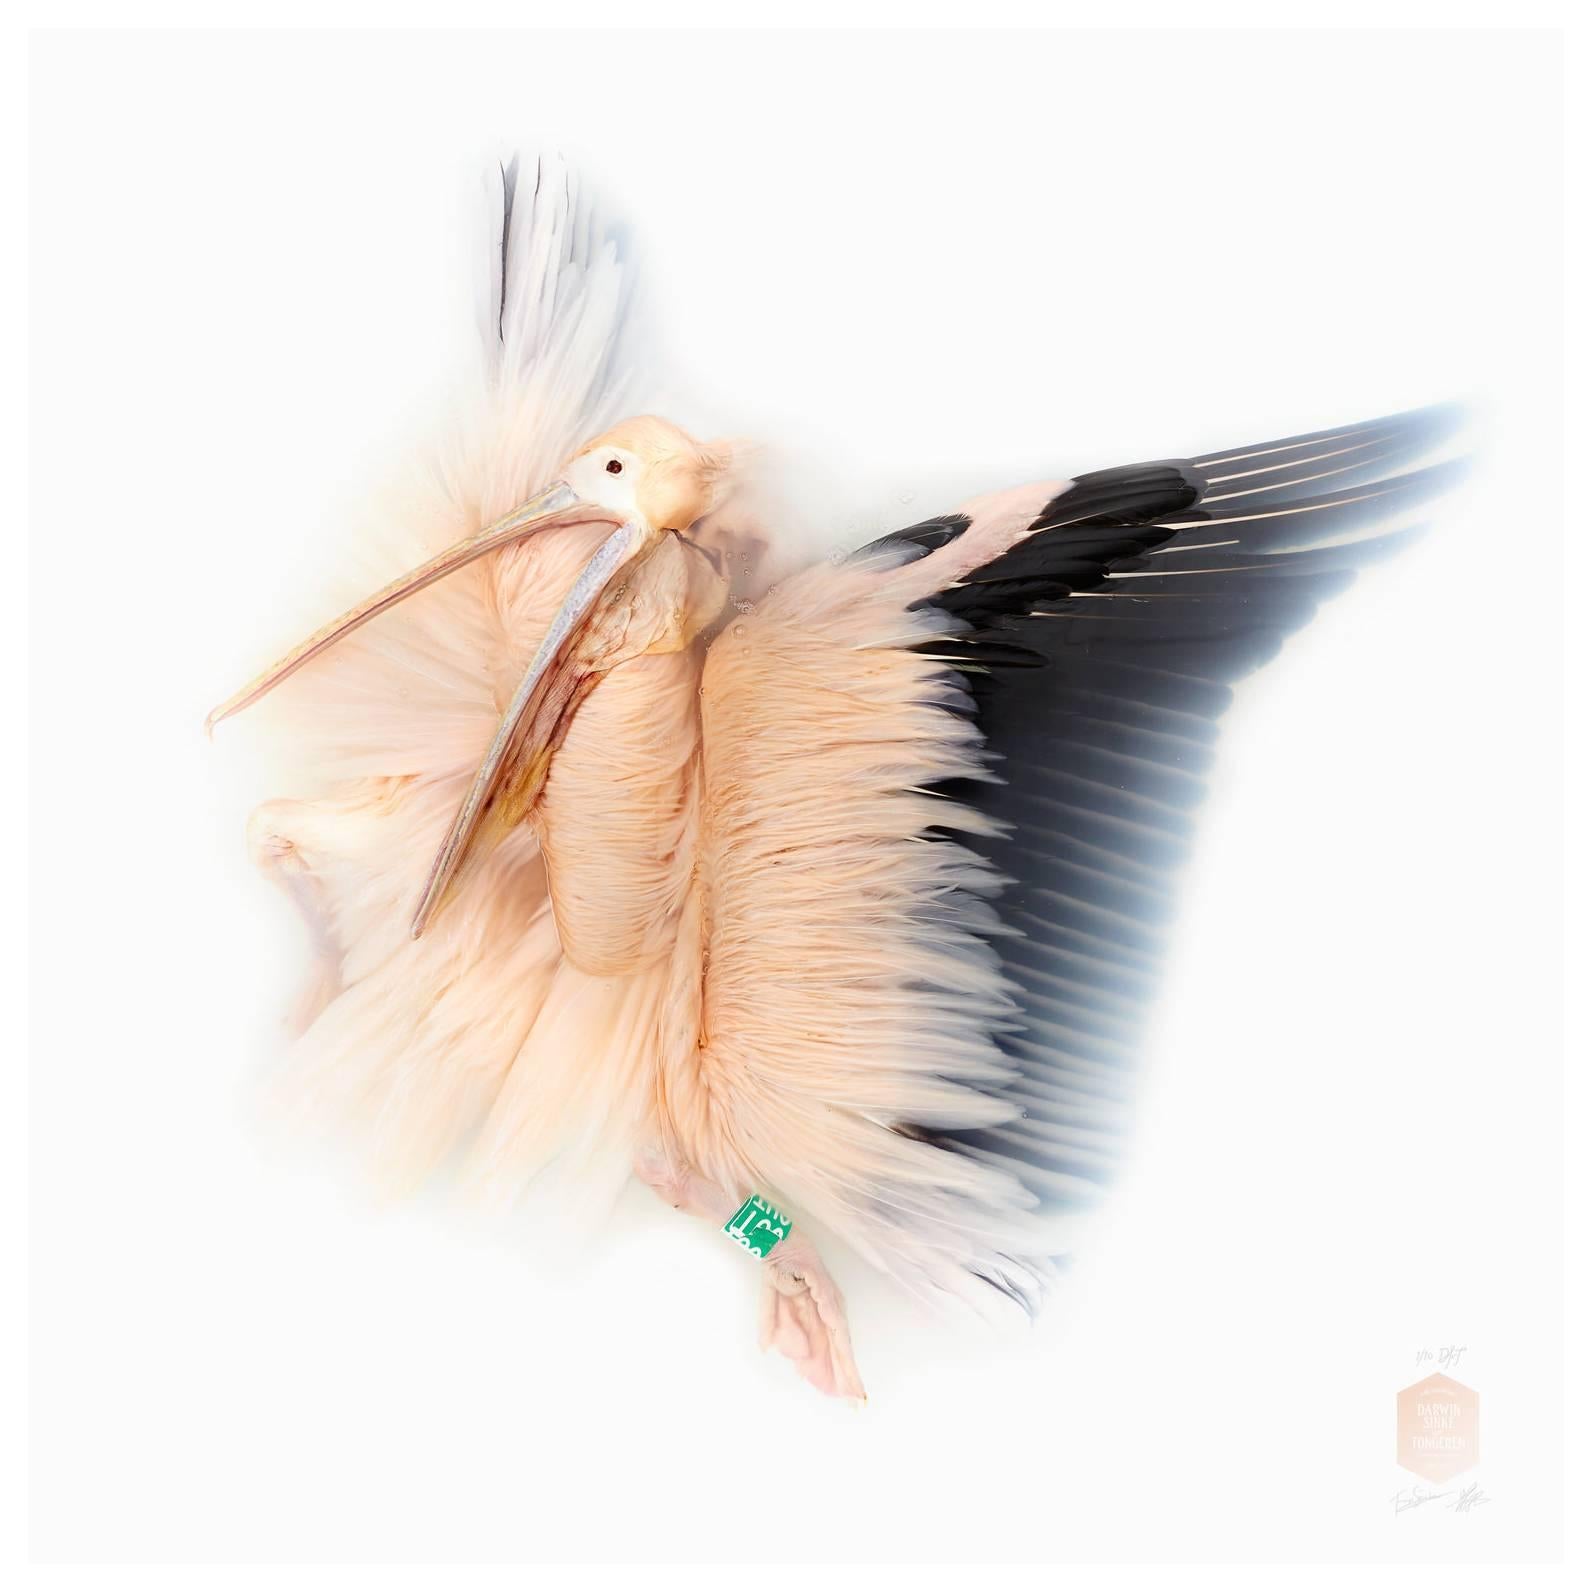 Art Print Titled 'Unknown Pose by Great White Pelican' by Sinke & van Tongeren For Sale